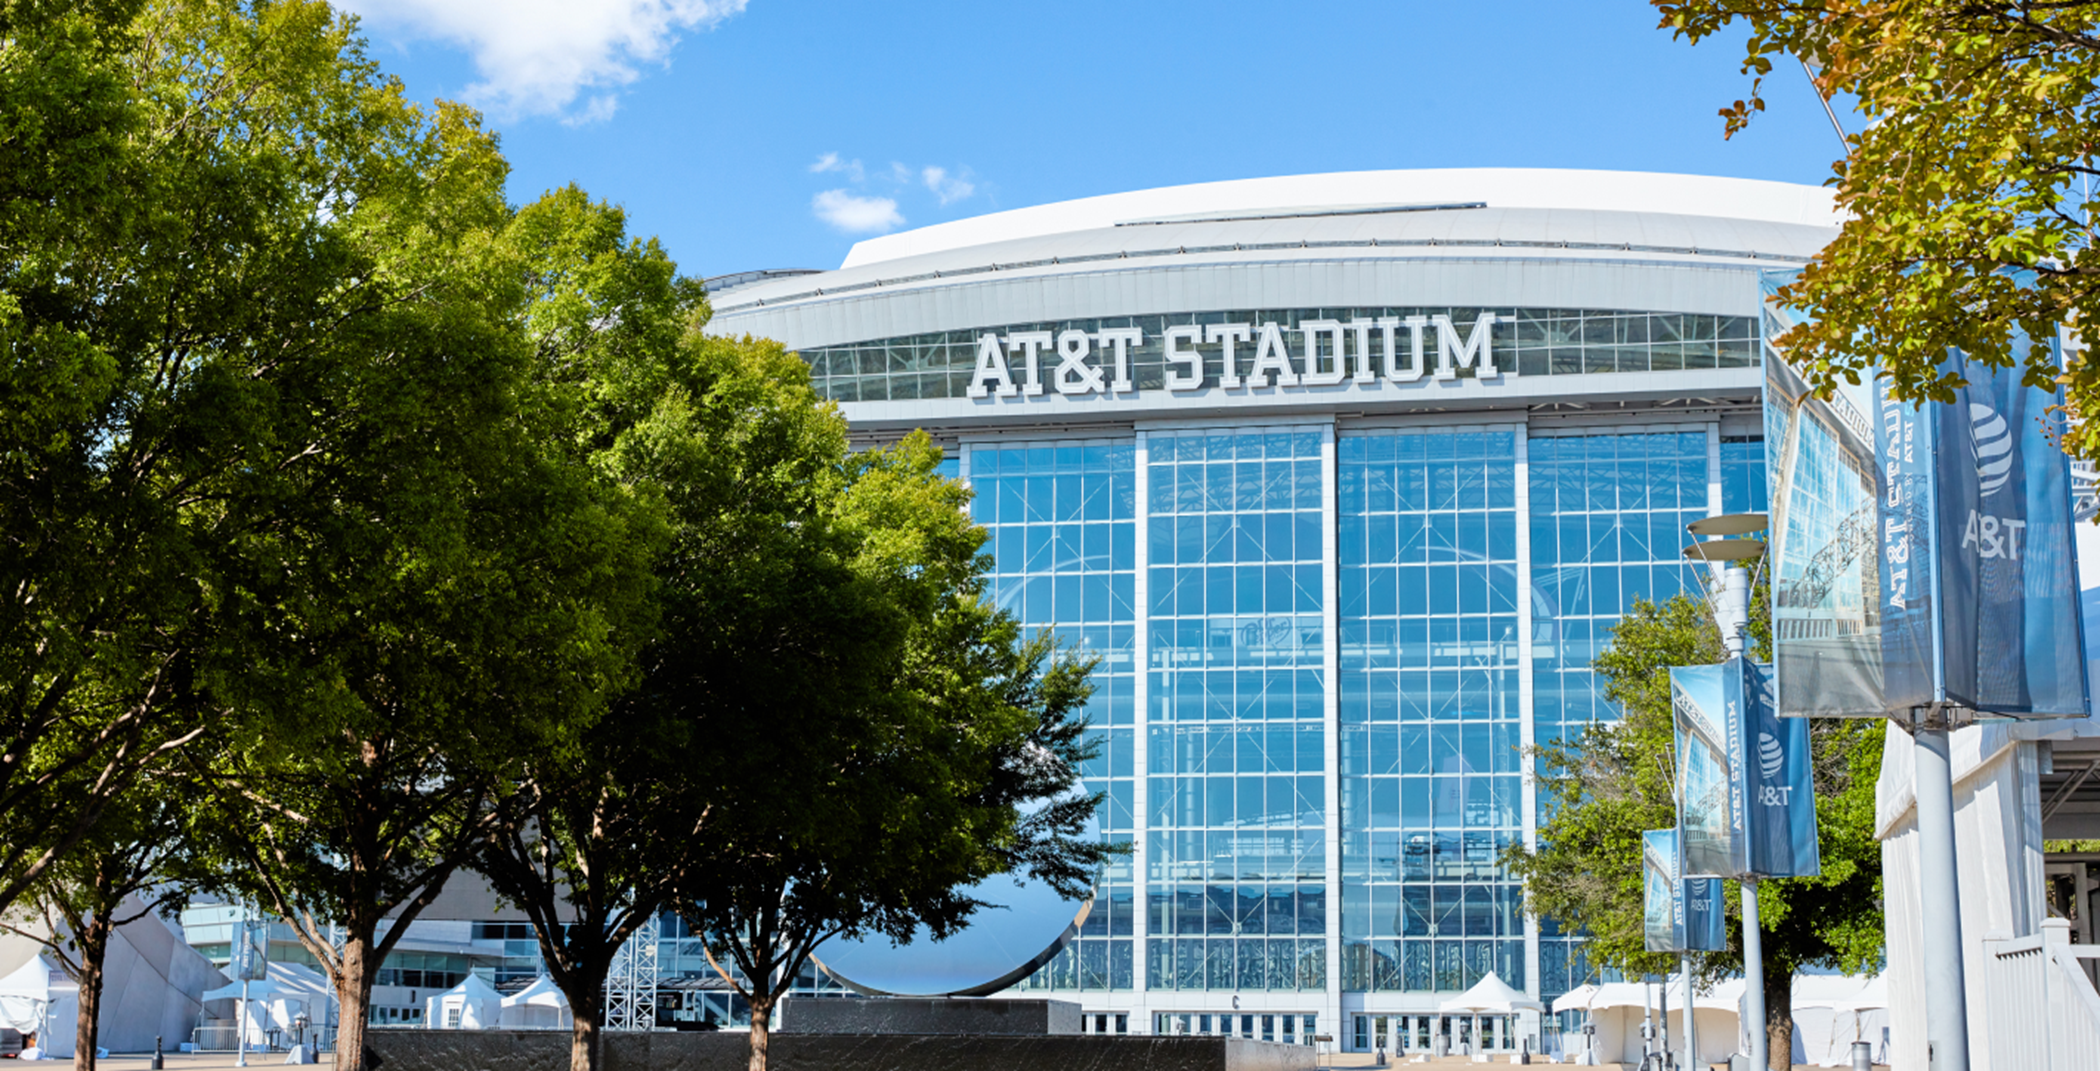 Dallas Cowboys AT&T Stadium located nearby